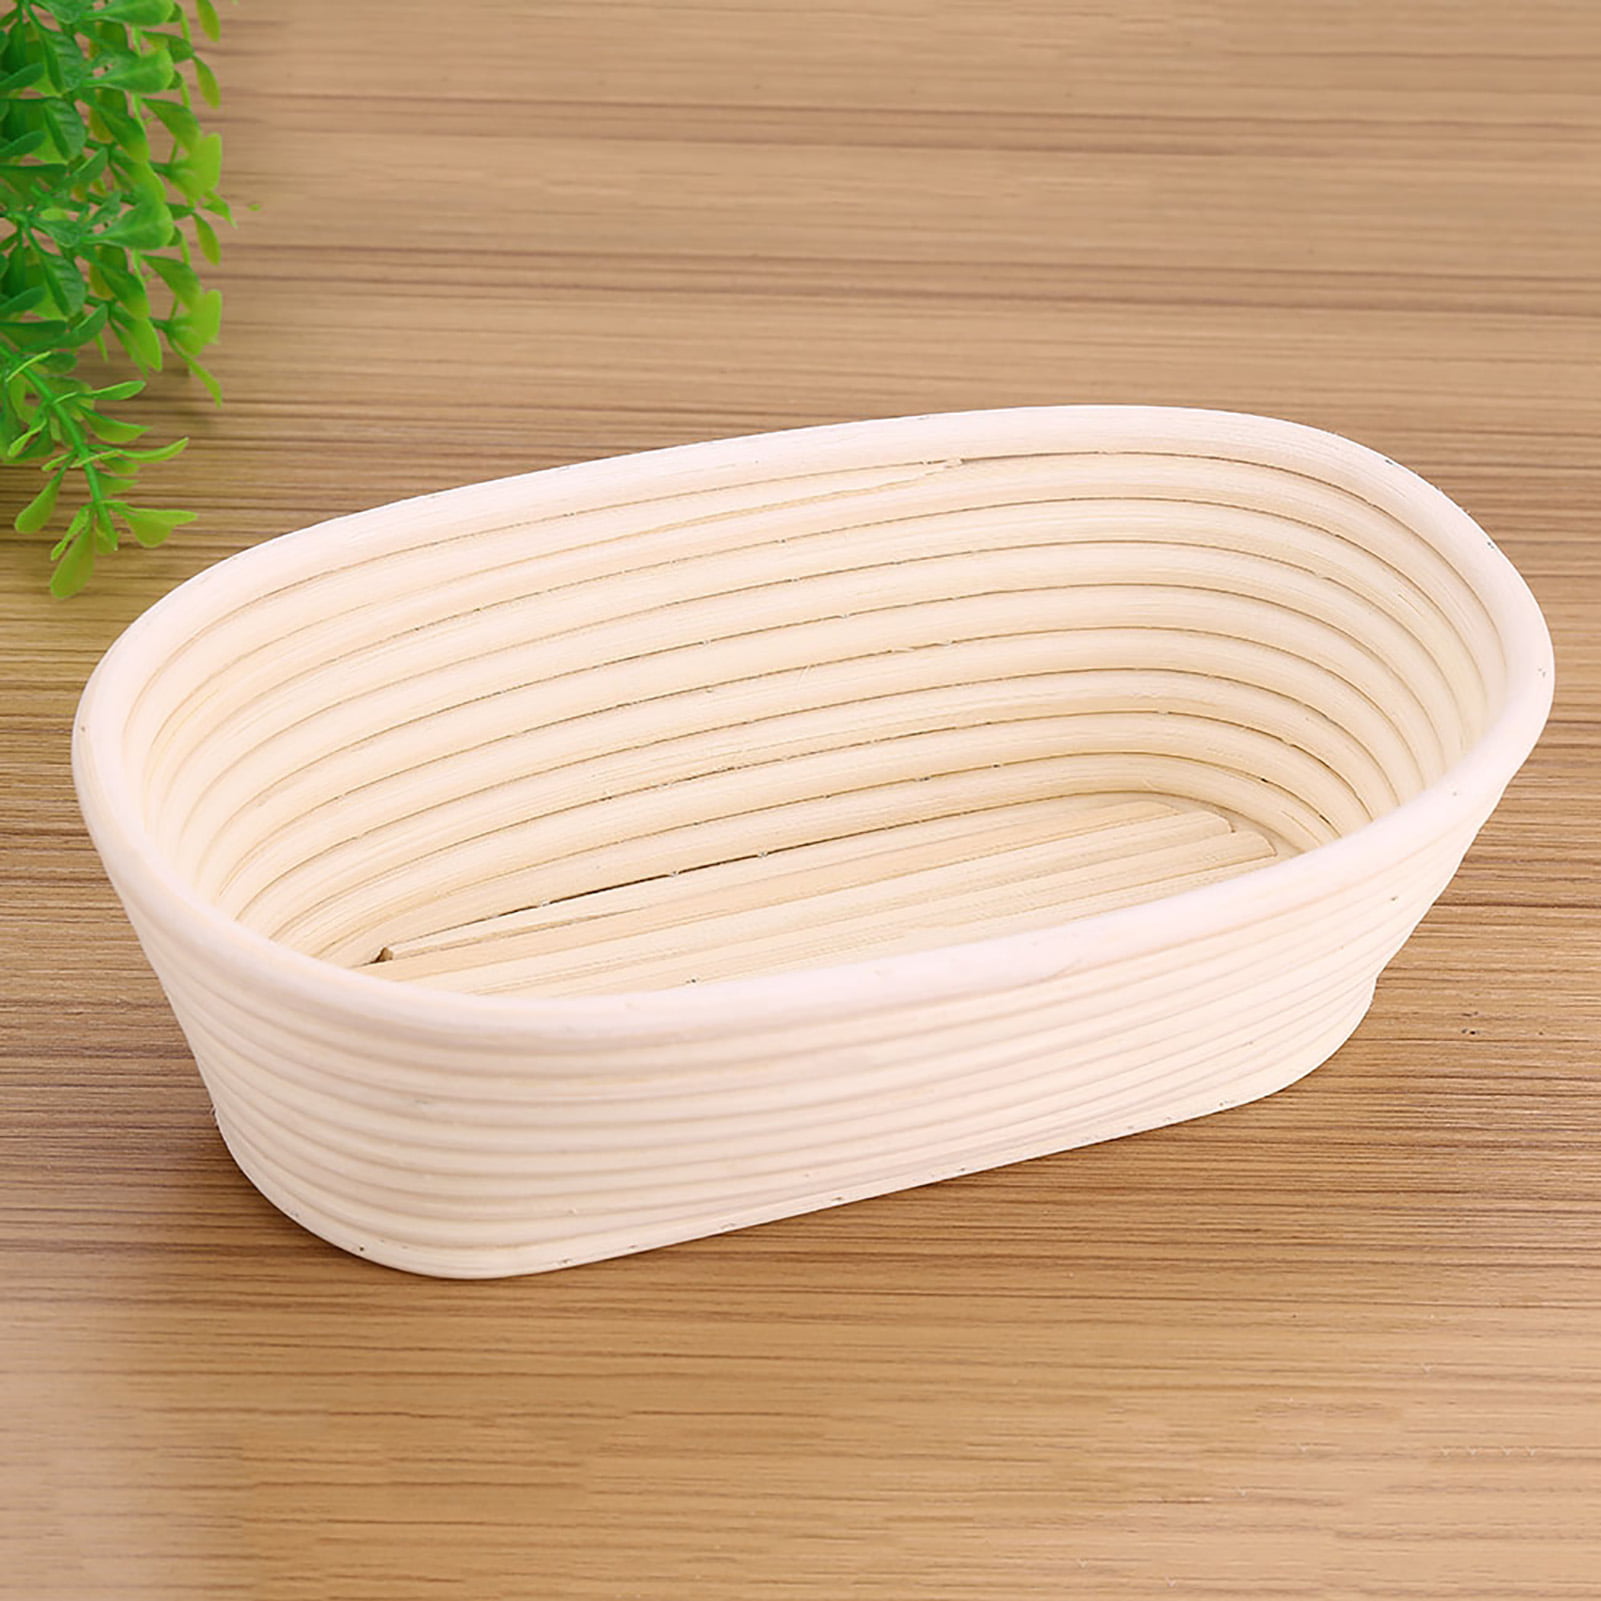 Details about   DIY Useful Oval/Strip Bread Proofing Proving Rattan-Basket Kitchen Tools 2 Type 